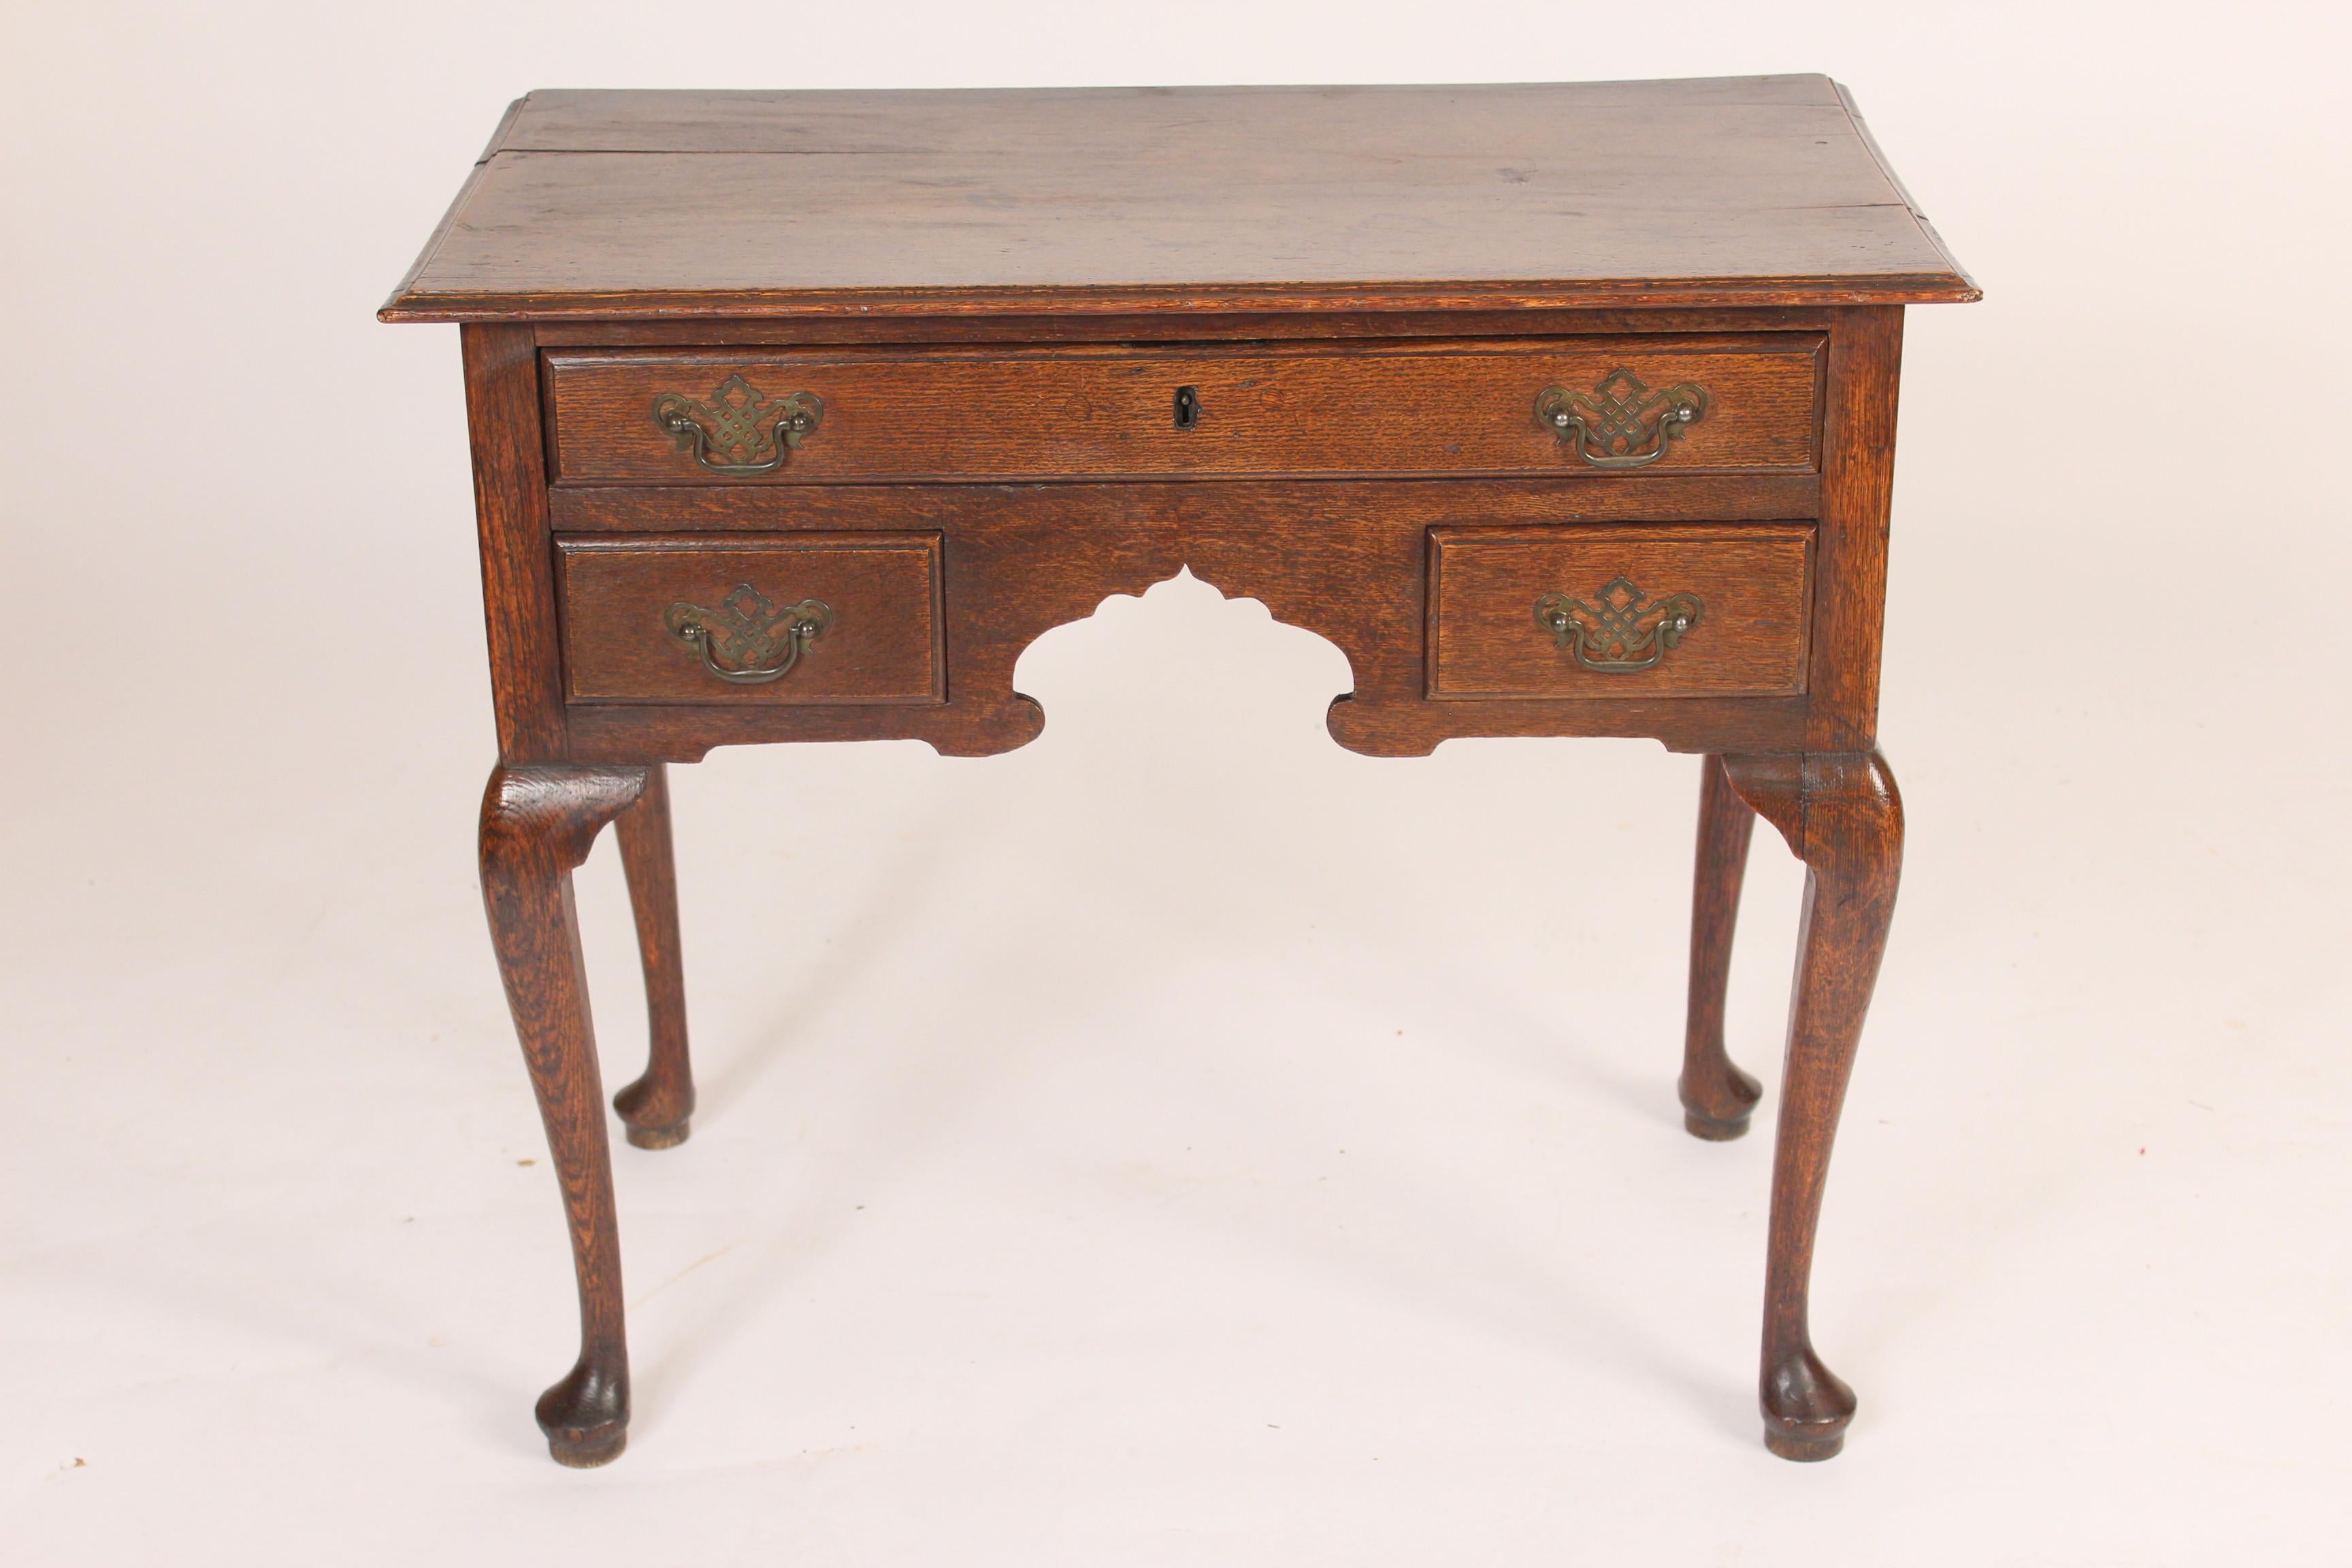 Antique Queen Anne style oak lowboy, 18th century. With cabriole legs ending in pad feet and nice old color.